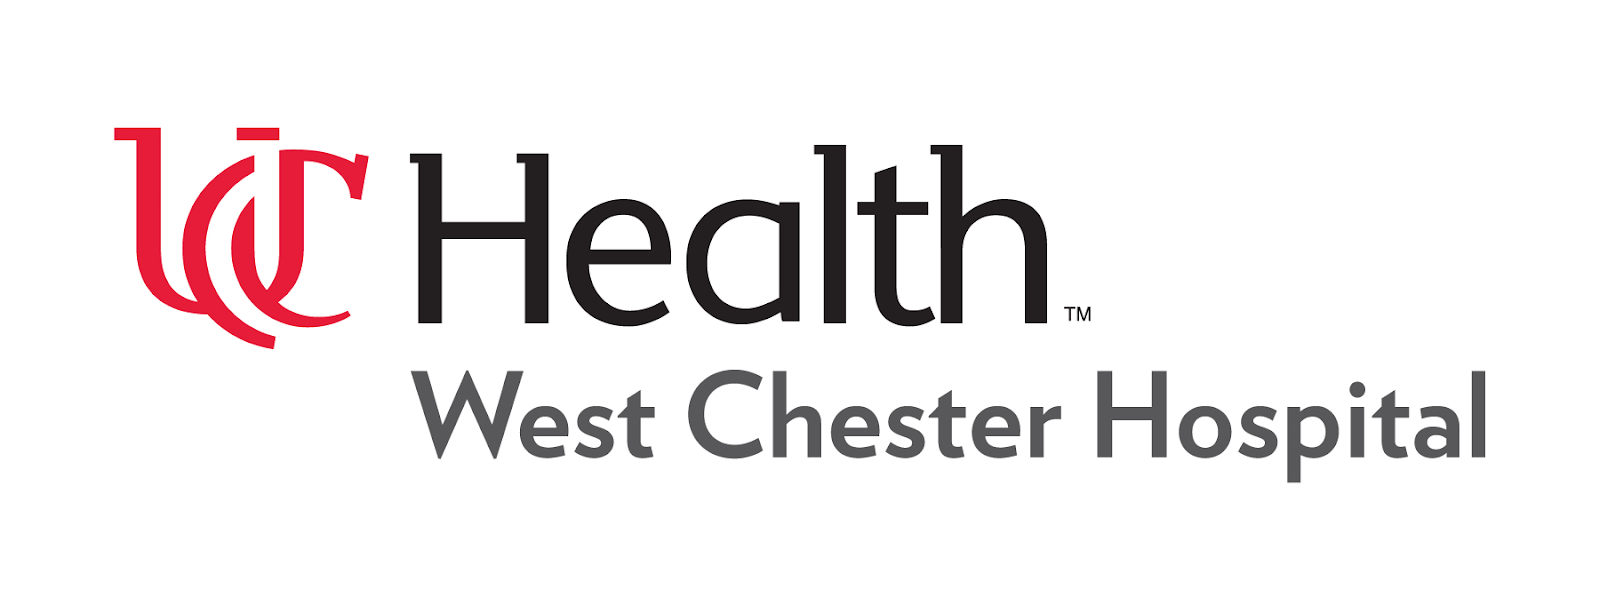 UC Health - West Chester Hospital